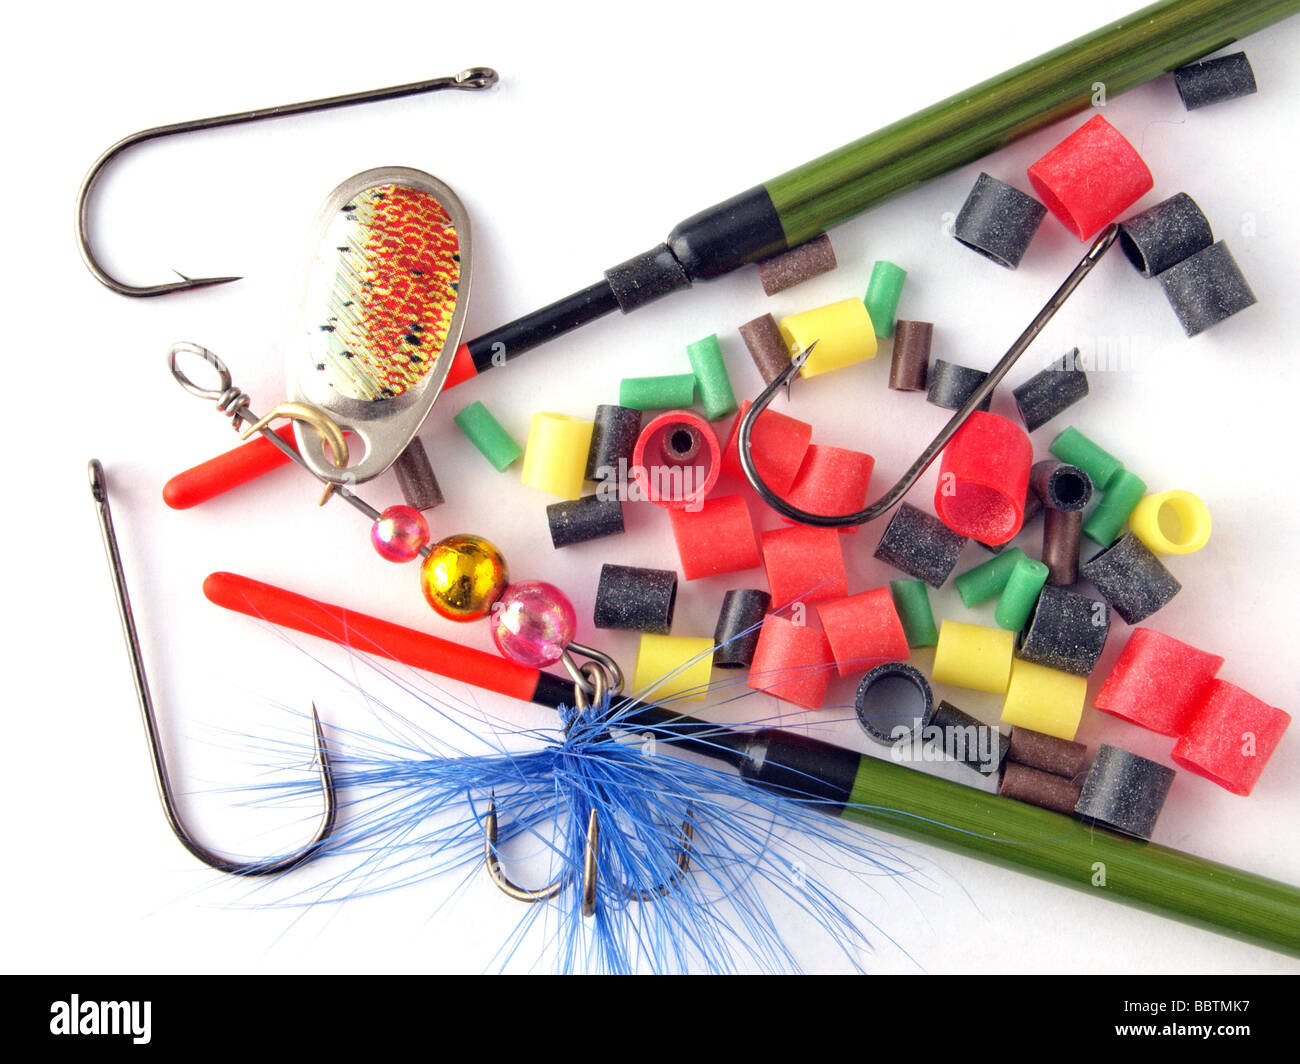 Equipment used by fishermen to catch fish Stock Photo - Alamy